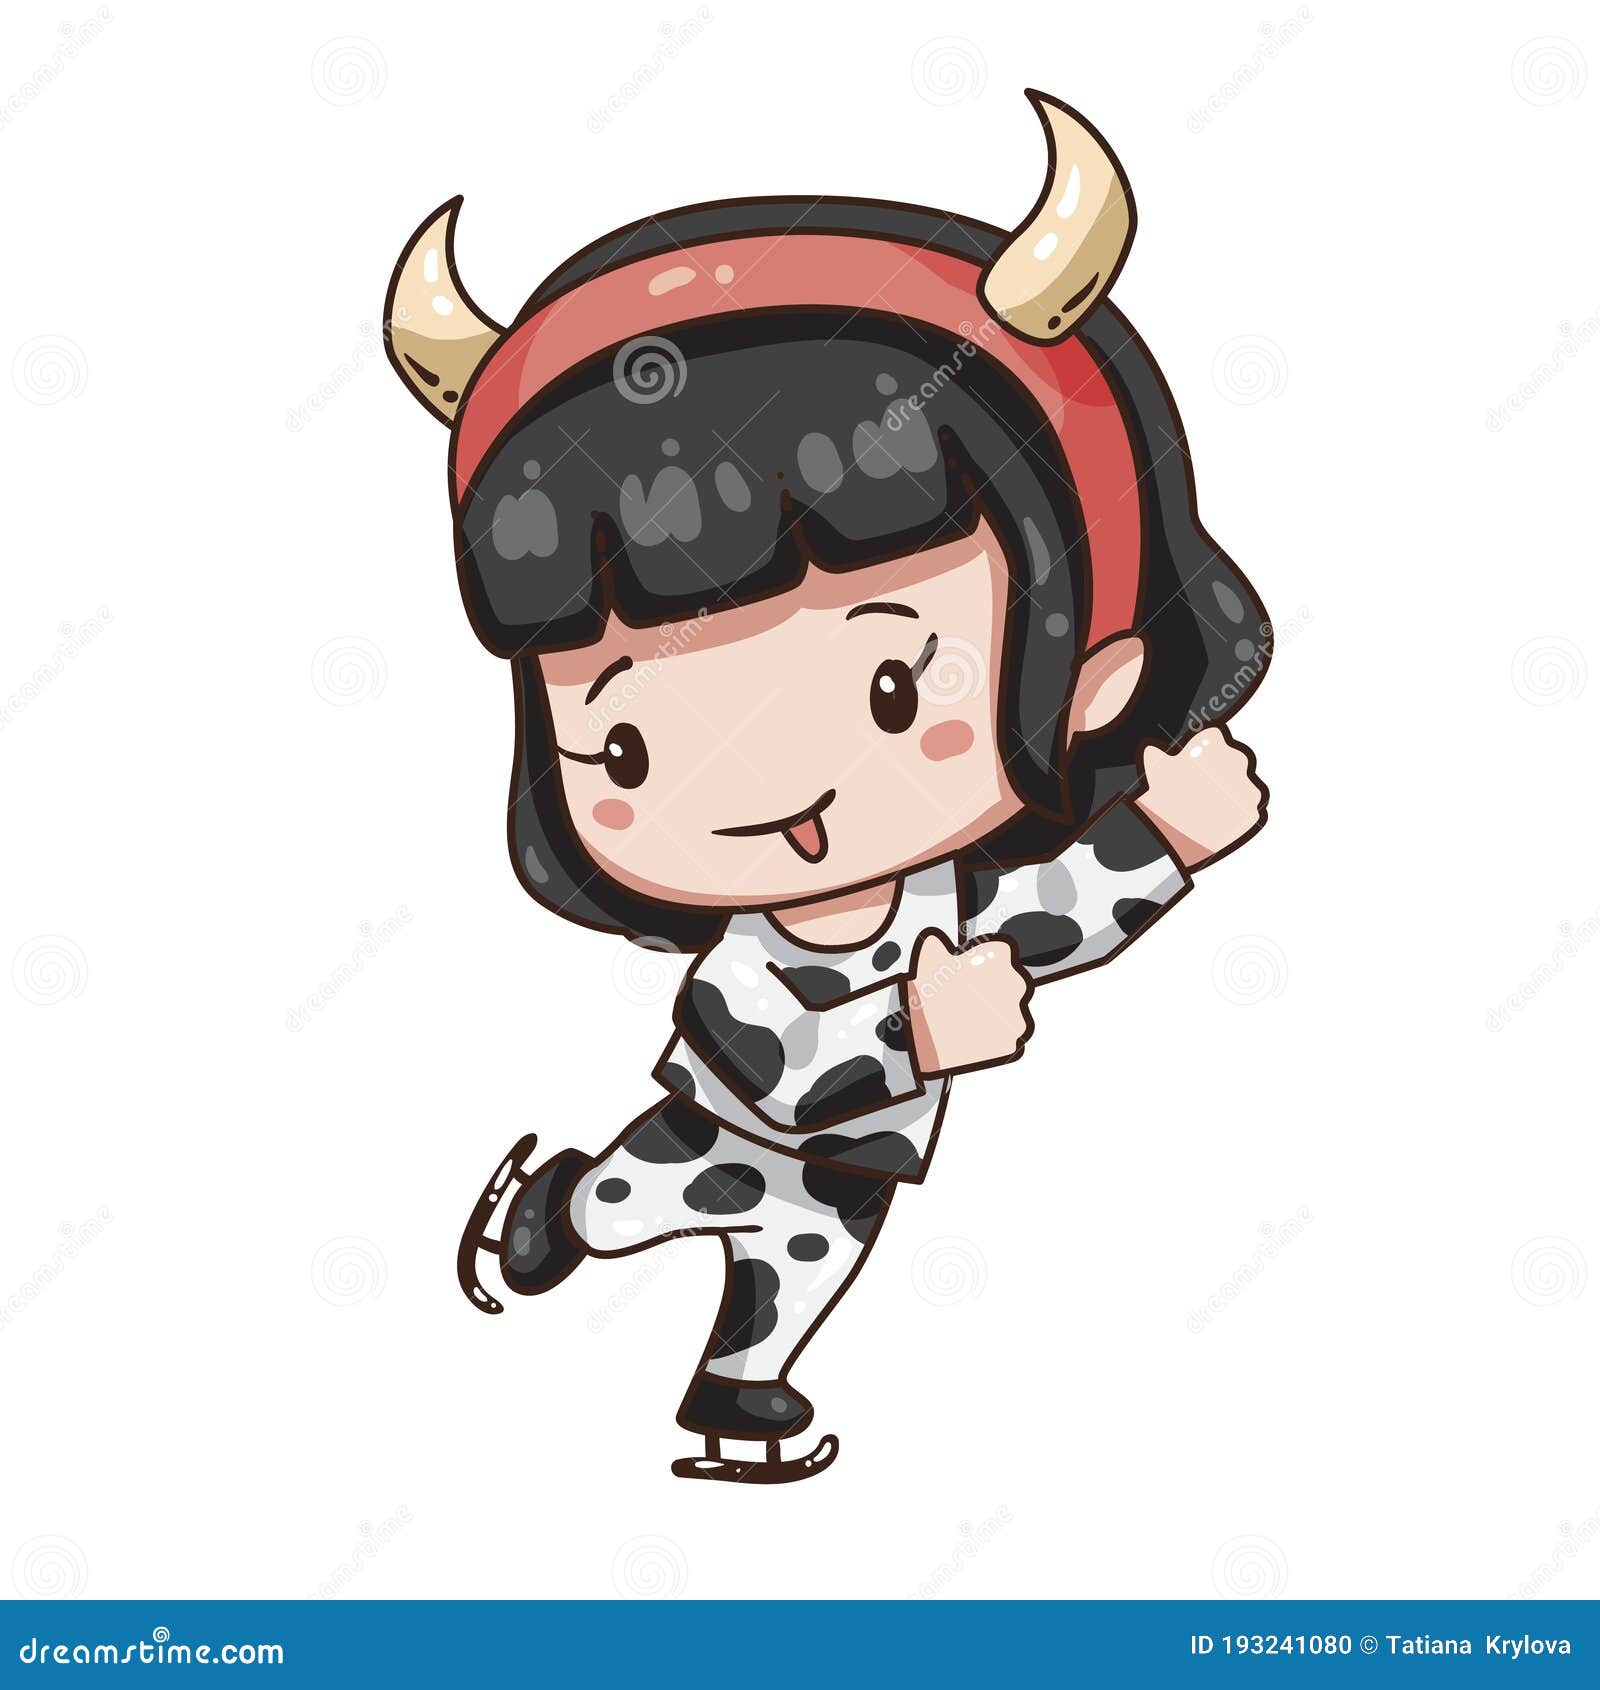 Cute Cow Cattle Vector Hd Images, Cute Cow Cartoon Vector, Cow Clipart, Cow,  Baby PNG Image For Free Download